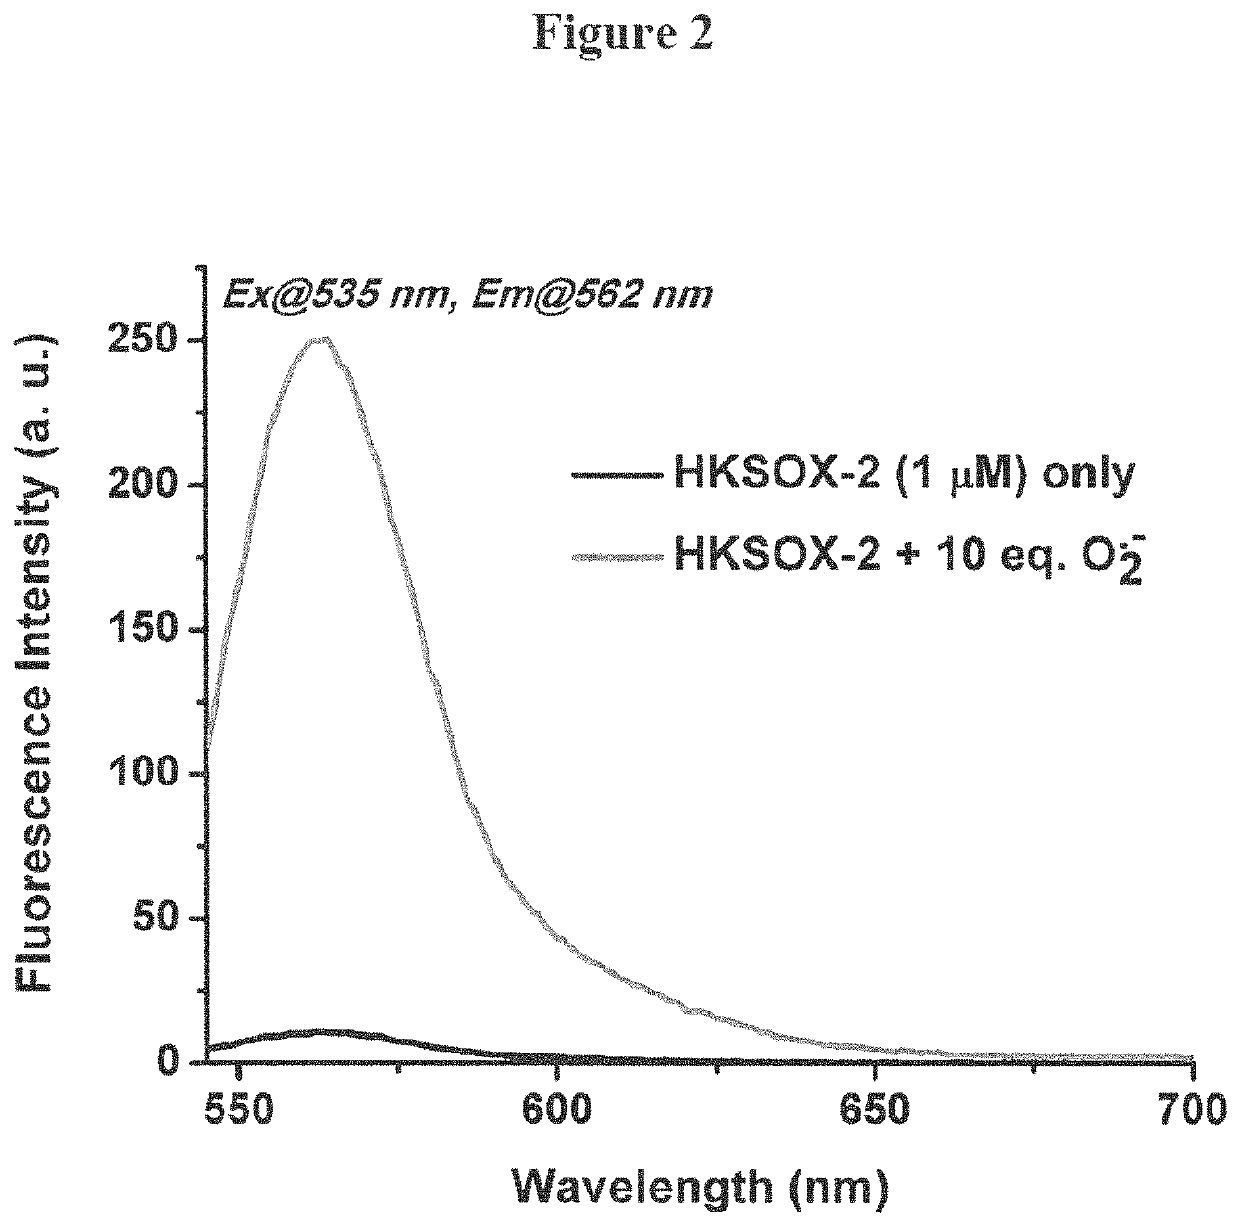 Bistrifilate-based fluorogenic probes for detection of superoxide anion radical